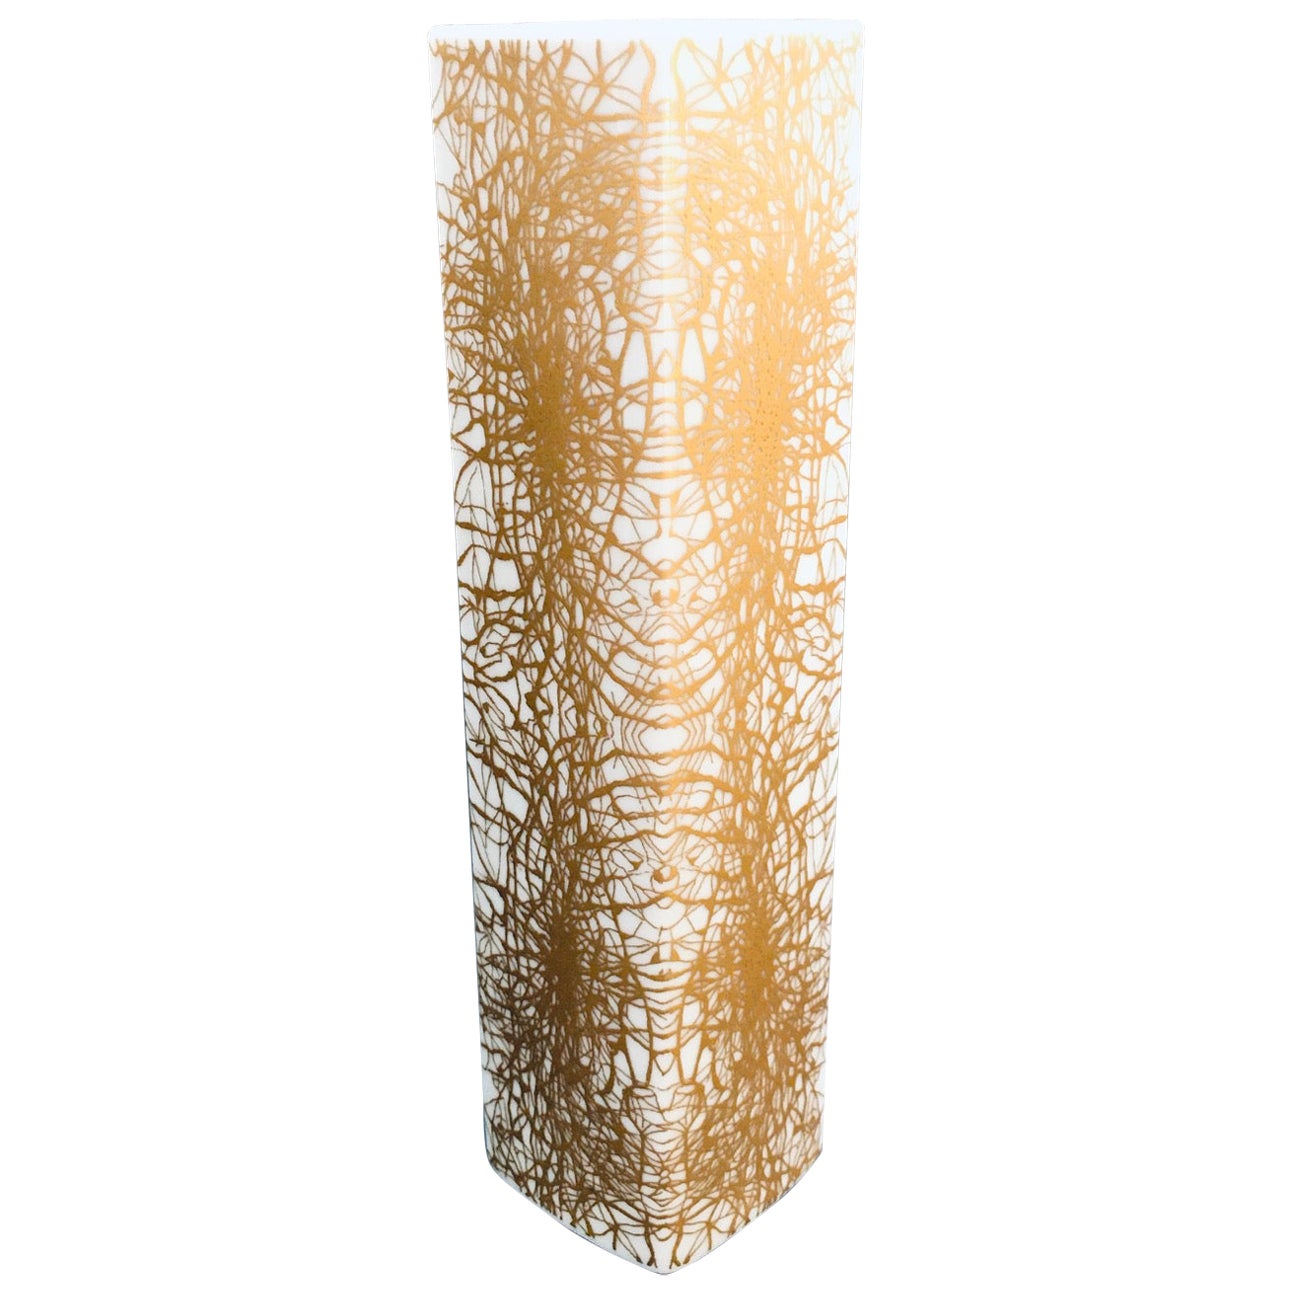 Art Porcelain Abstract Gold Pattern Vase by Heinrich & Co Selb Bavaria, Germany  For Sale